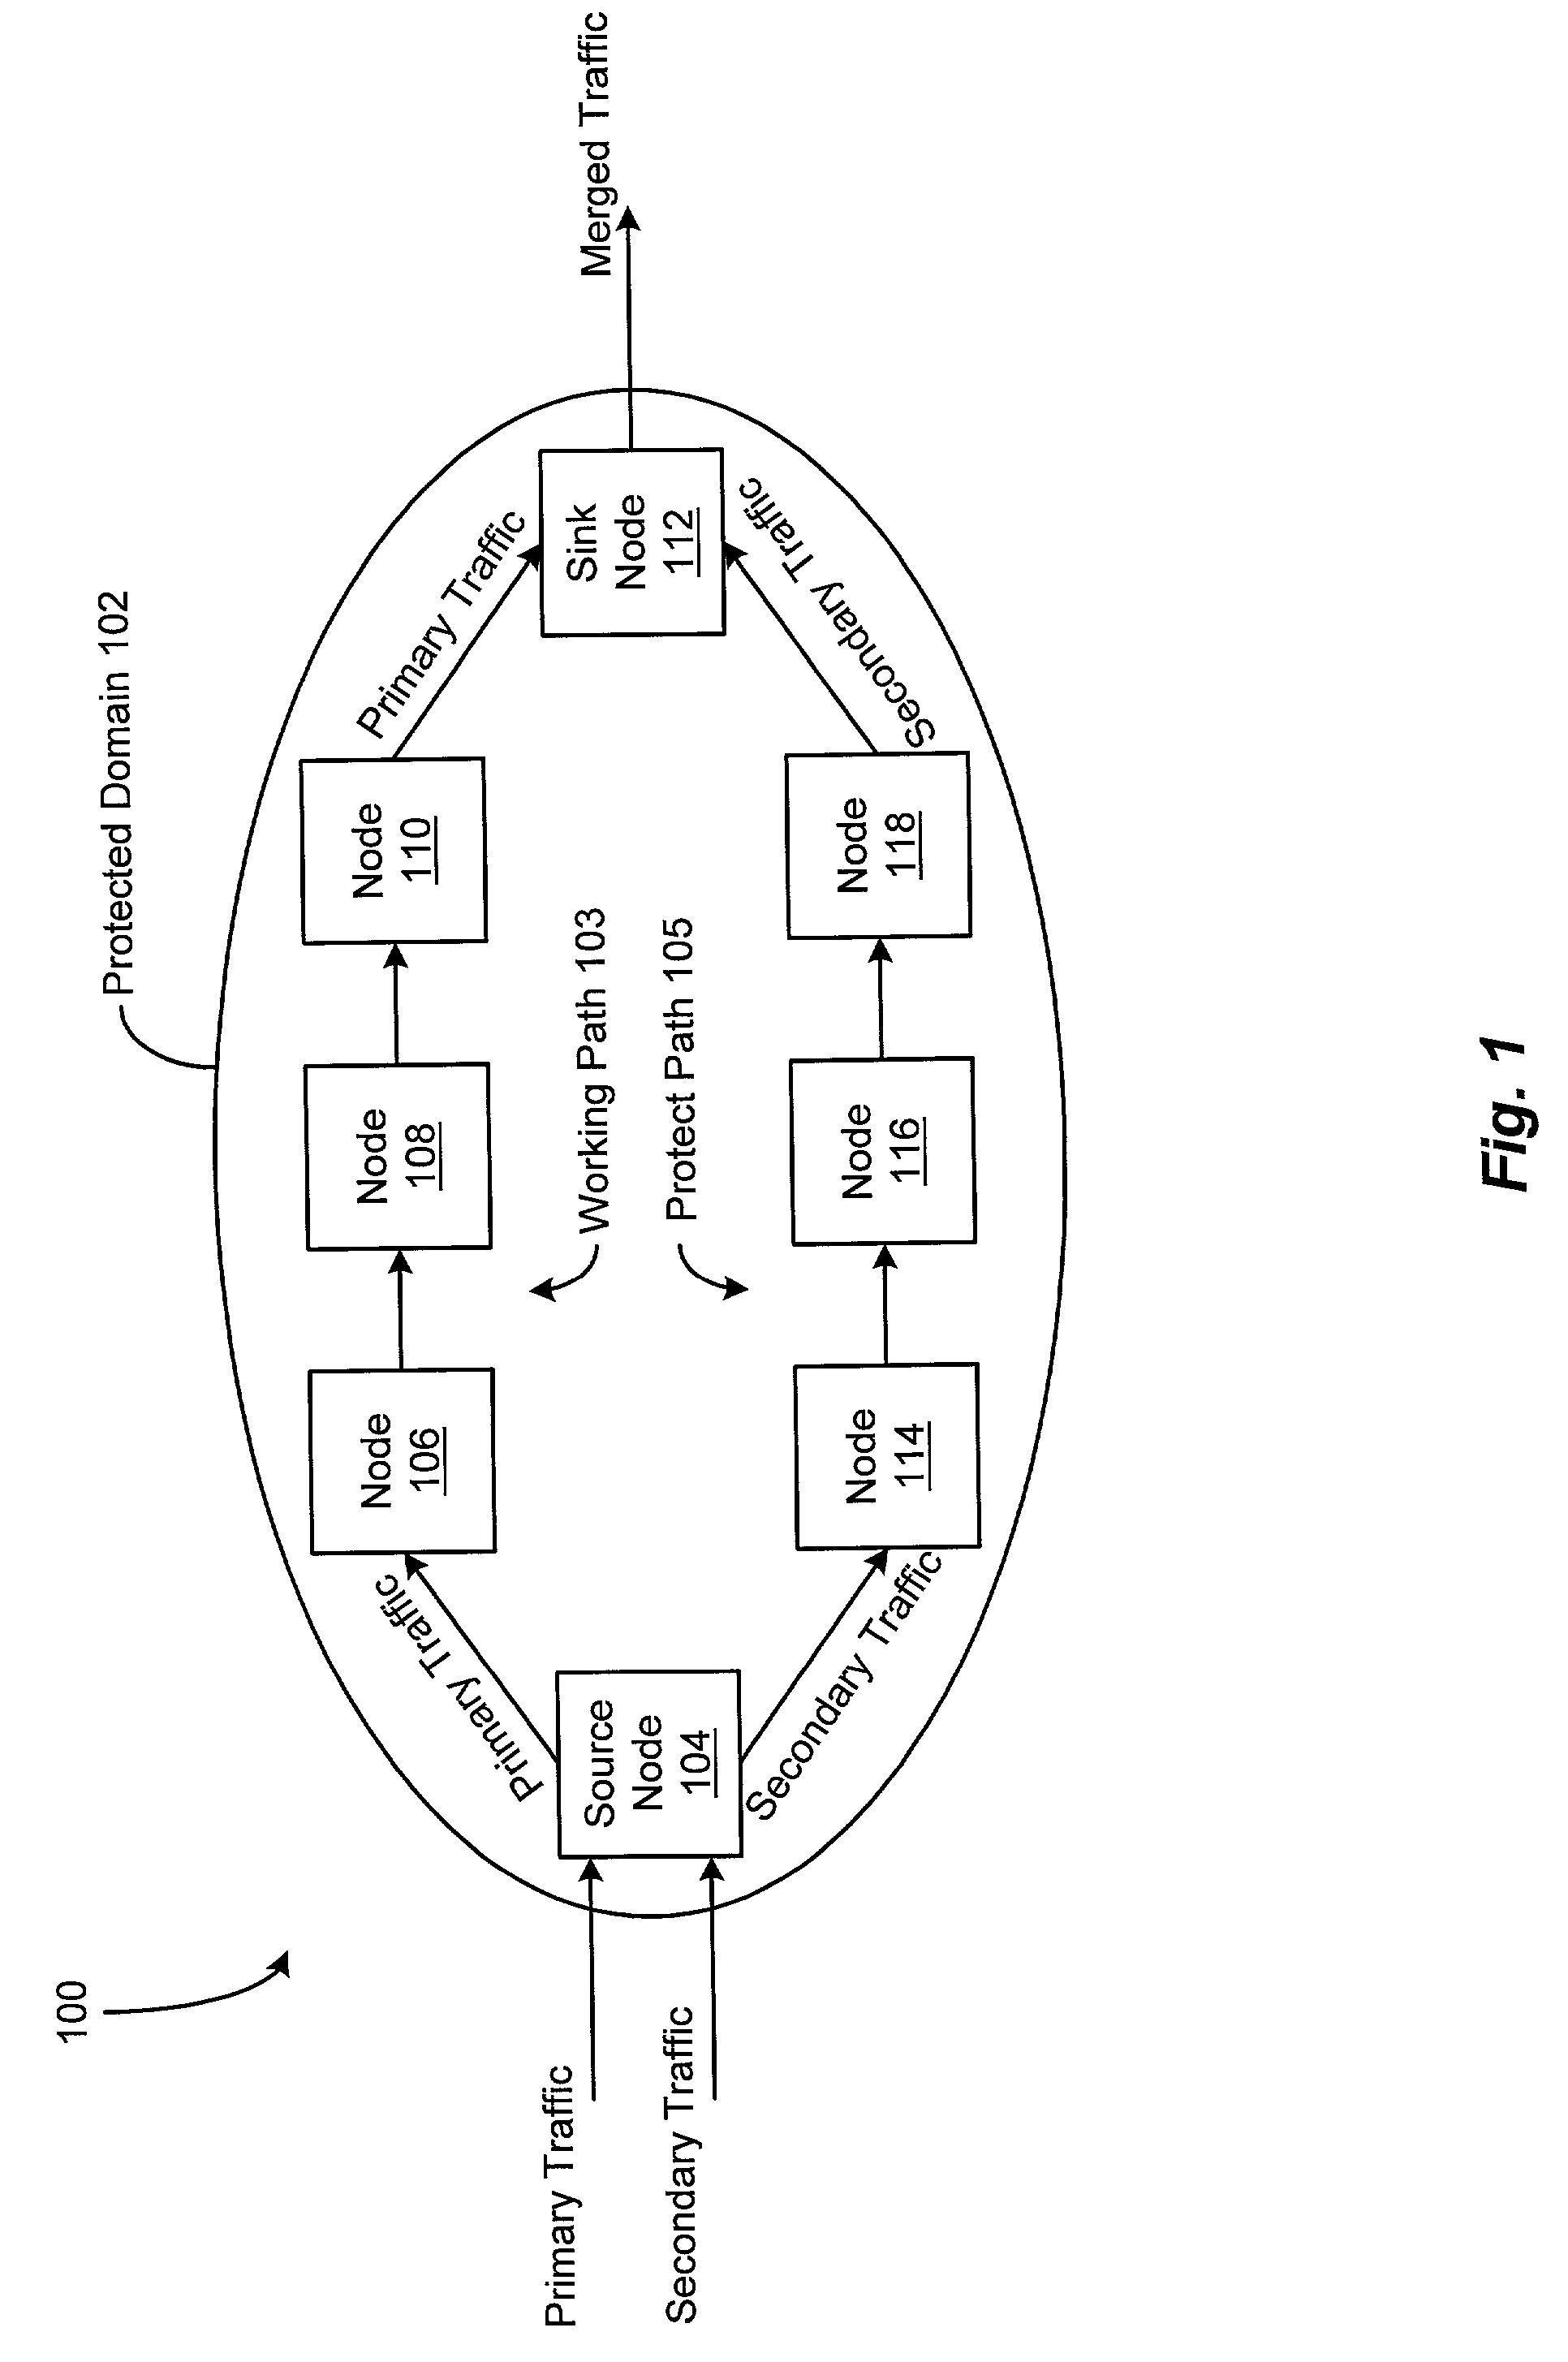 Protection switching in a communications network employing label switching